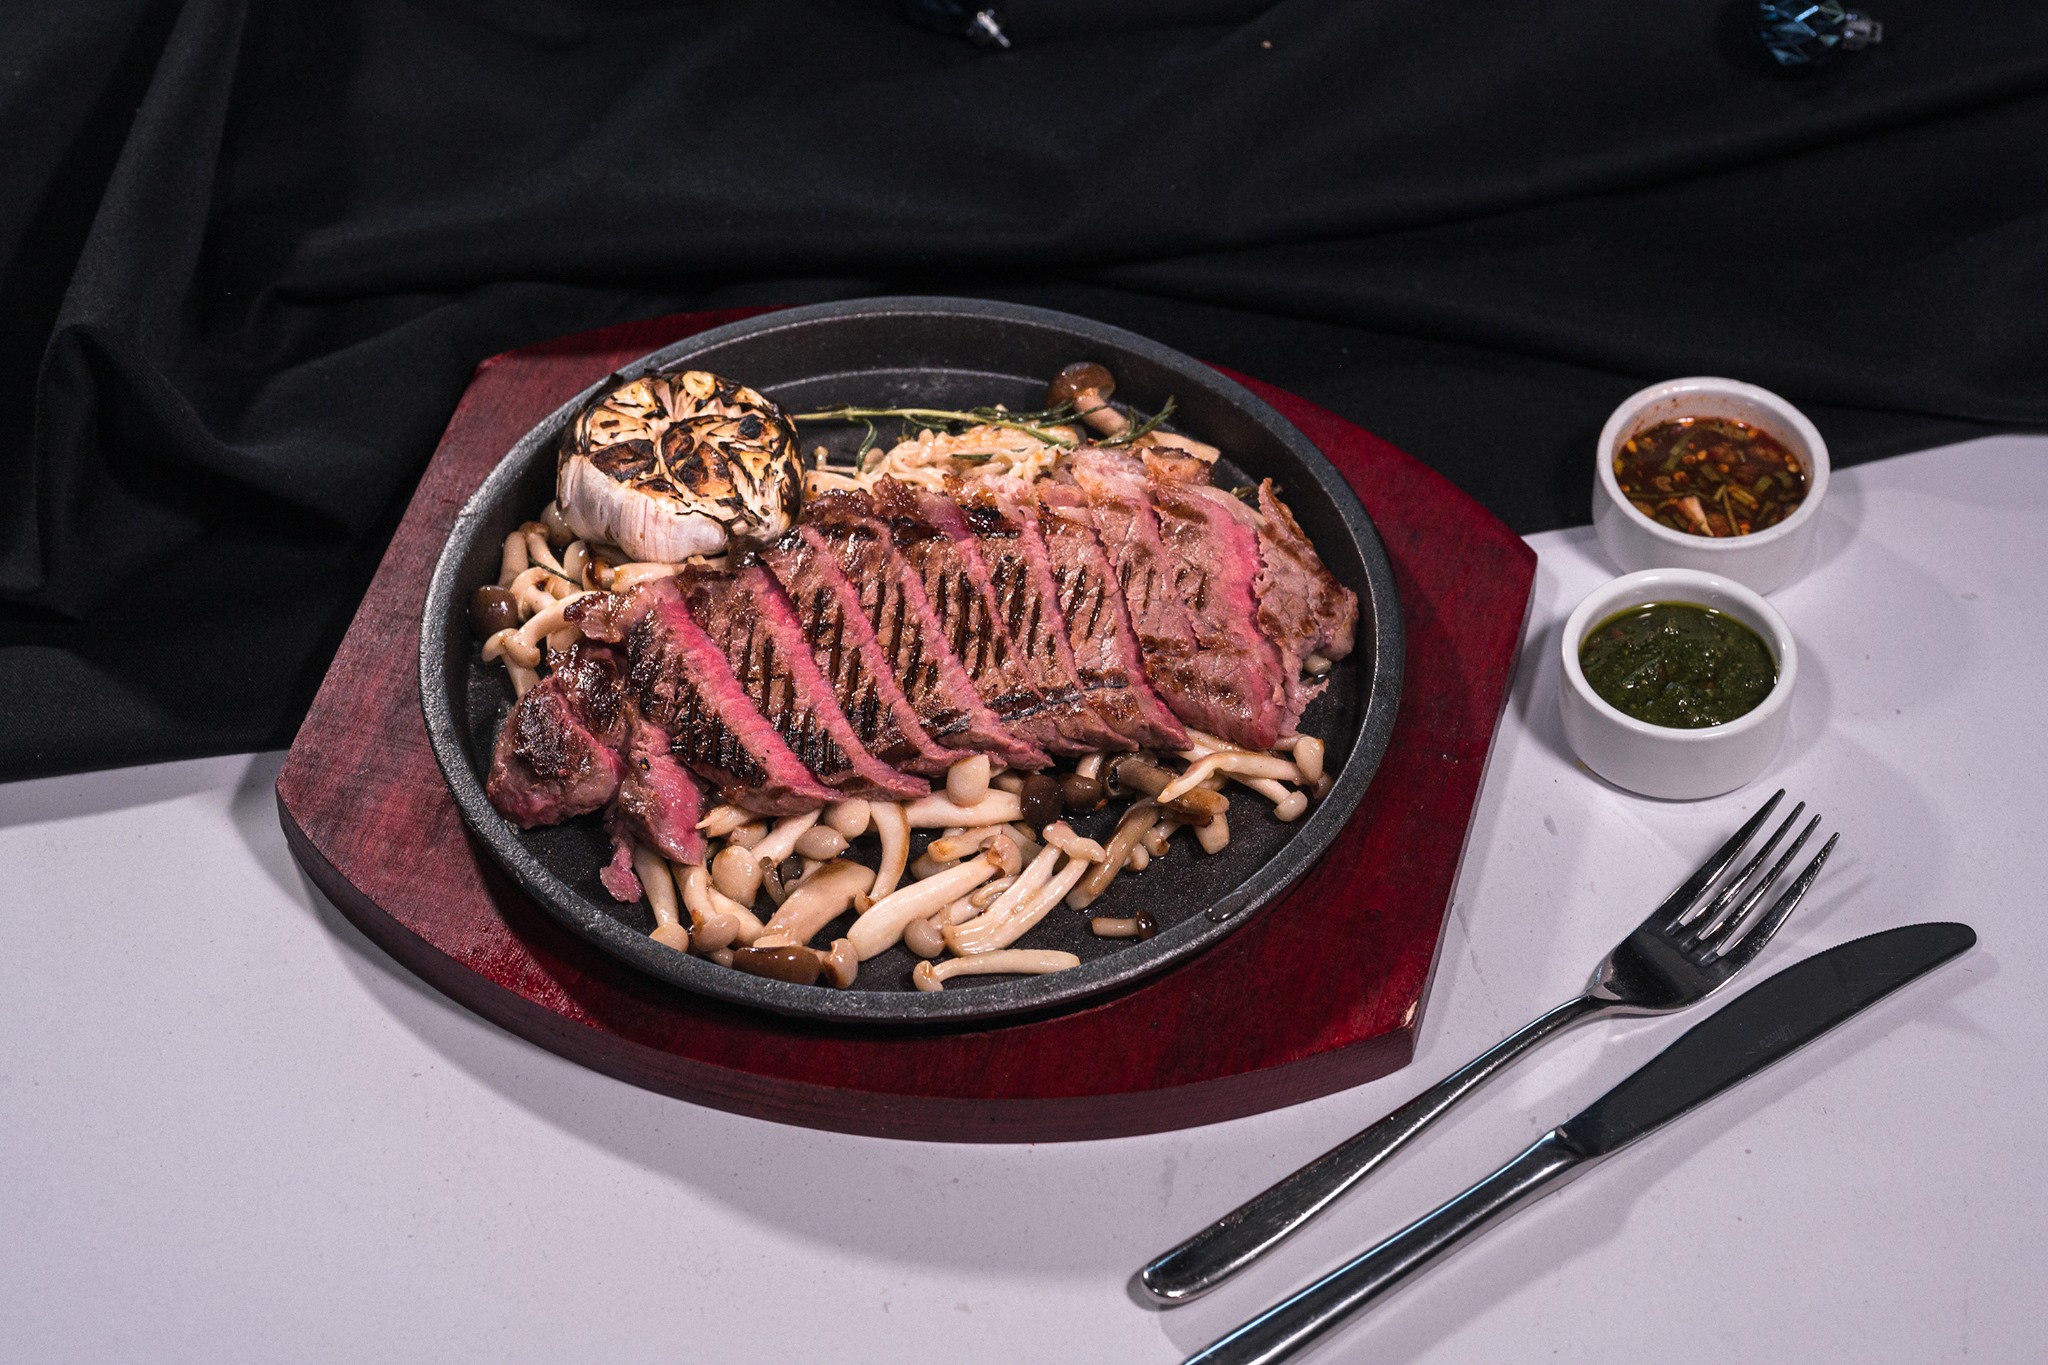 [Back to Thailand Chef’s Specials] Calling for all steak lovers out there! Our stone-grilled Wagyu beef is seasoned perfectly with Hunan peppers, cooked with Shimeji mushrooms, and grilled to the doneness you desire